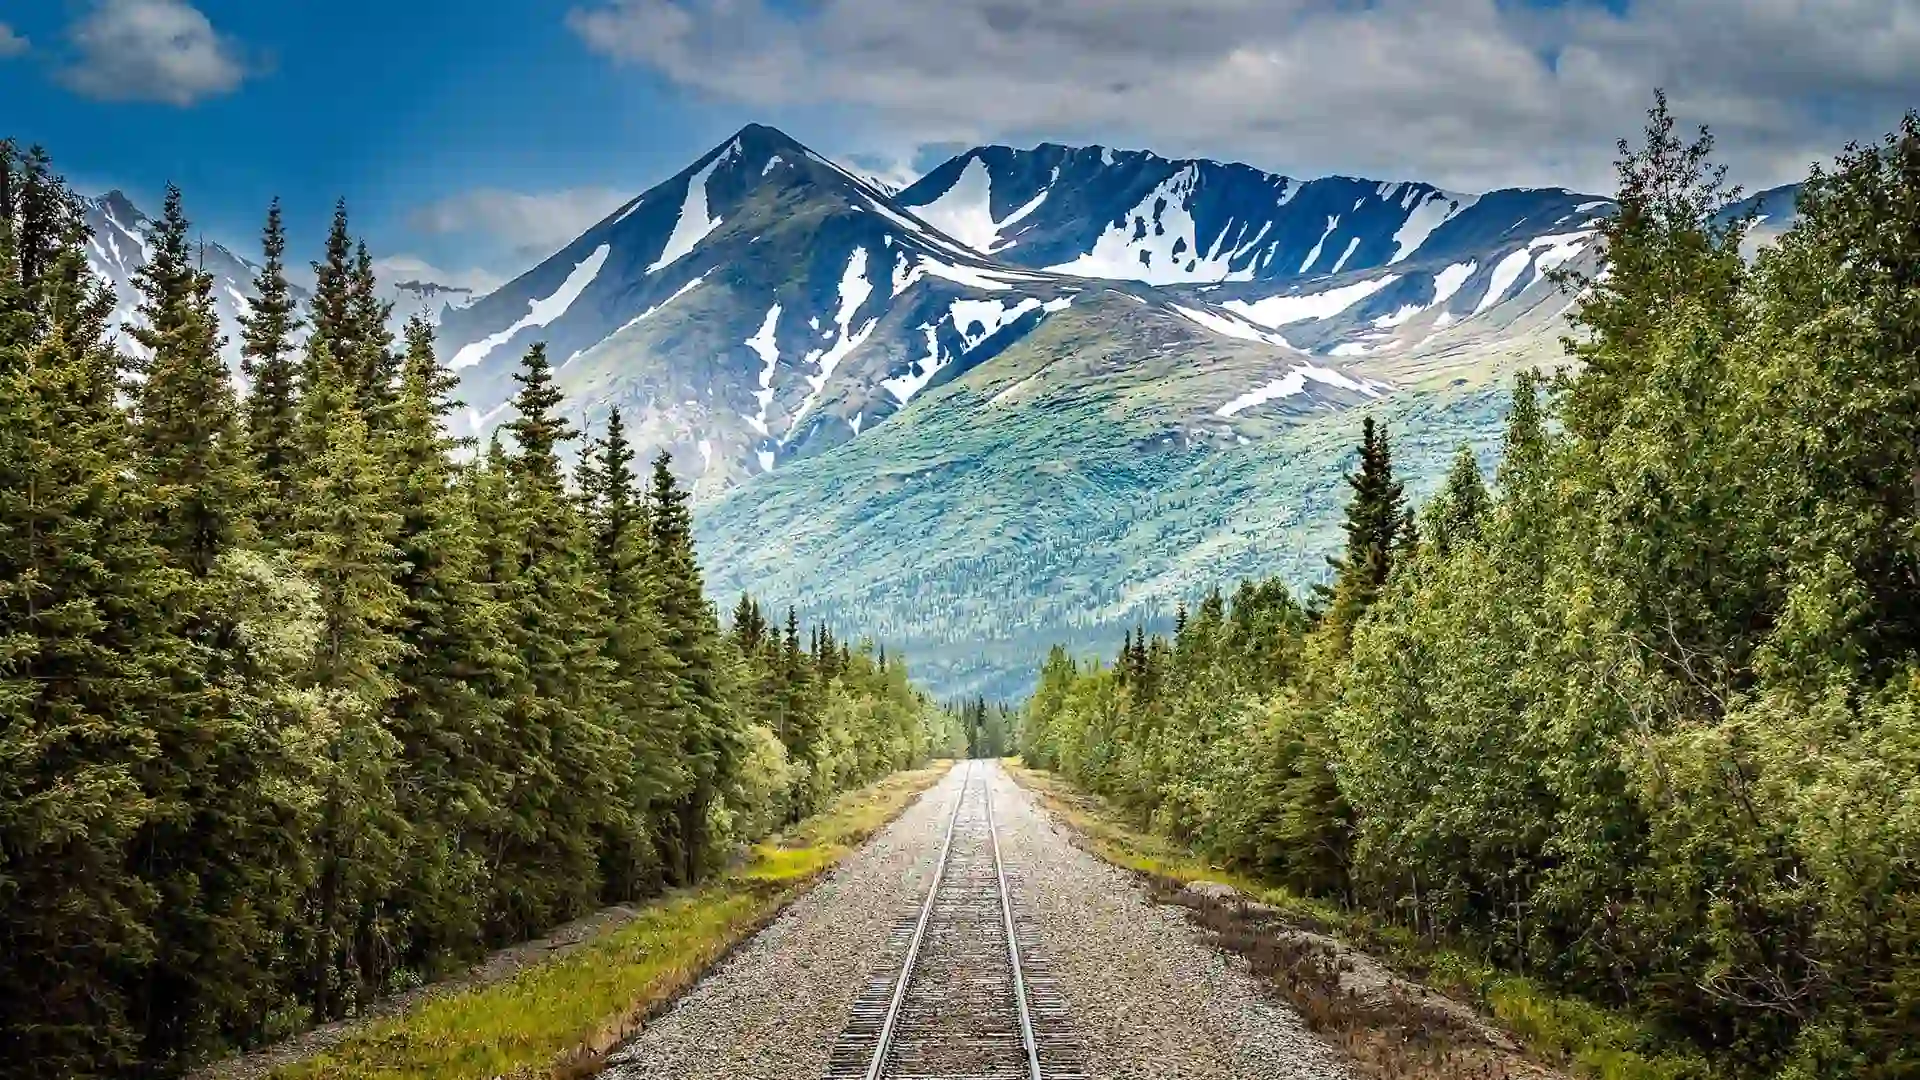 View of train tracks surrounded by mountainous landscape.